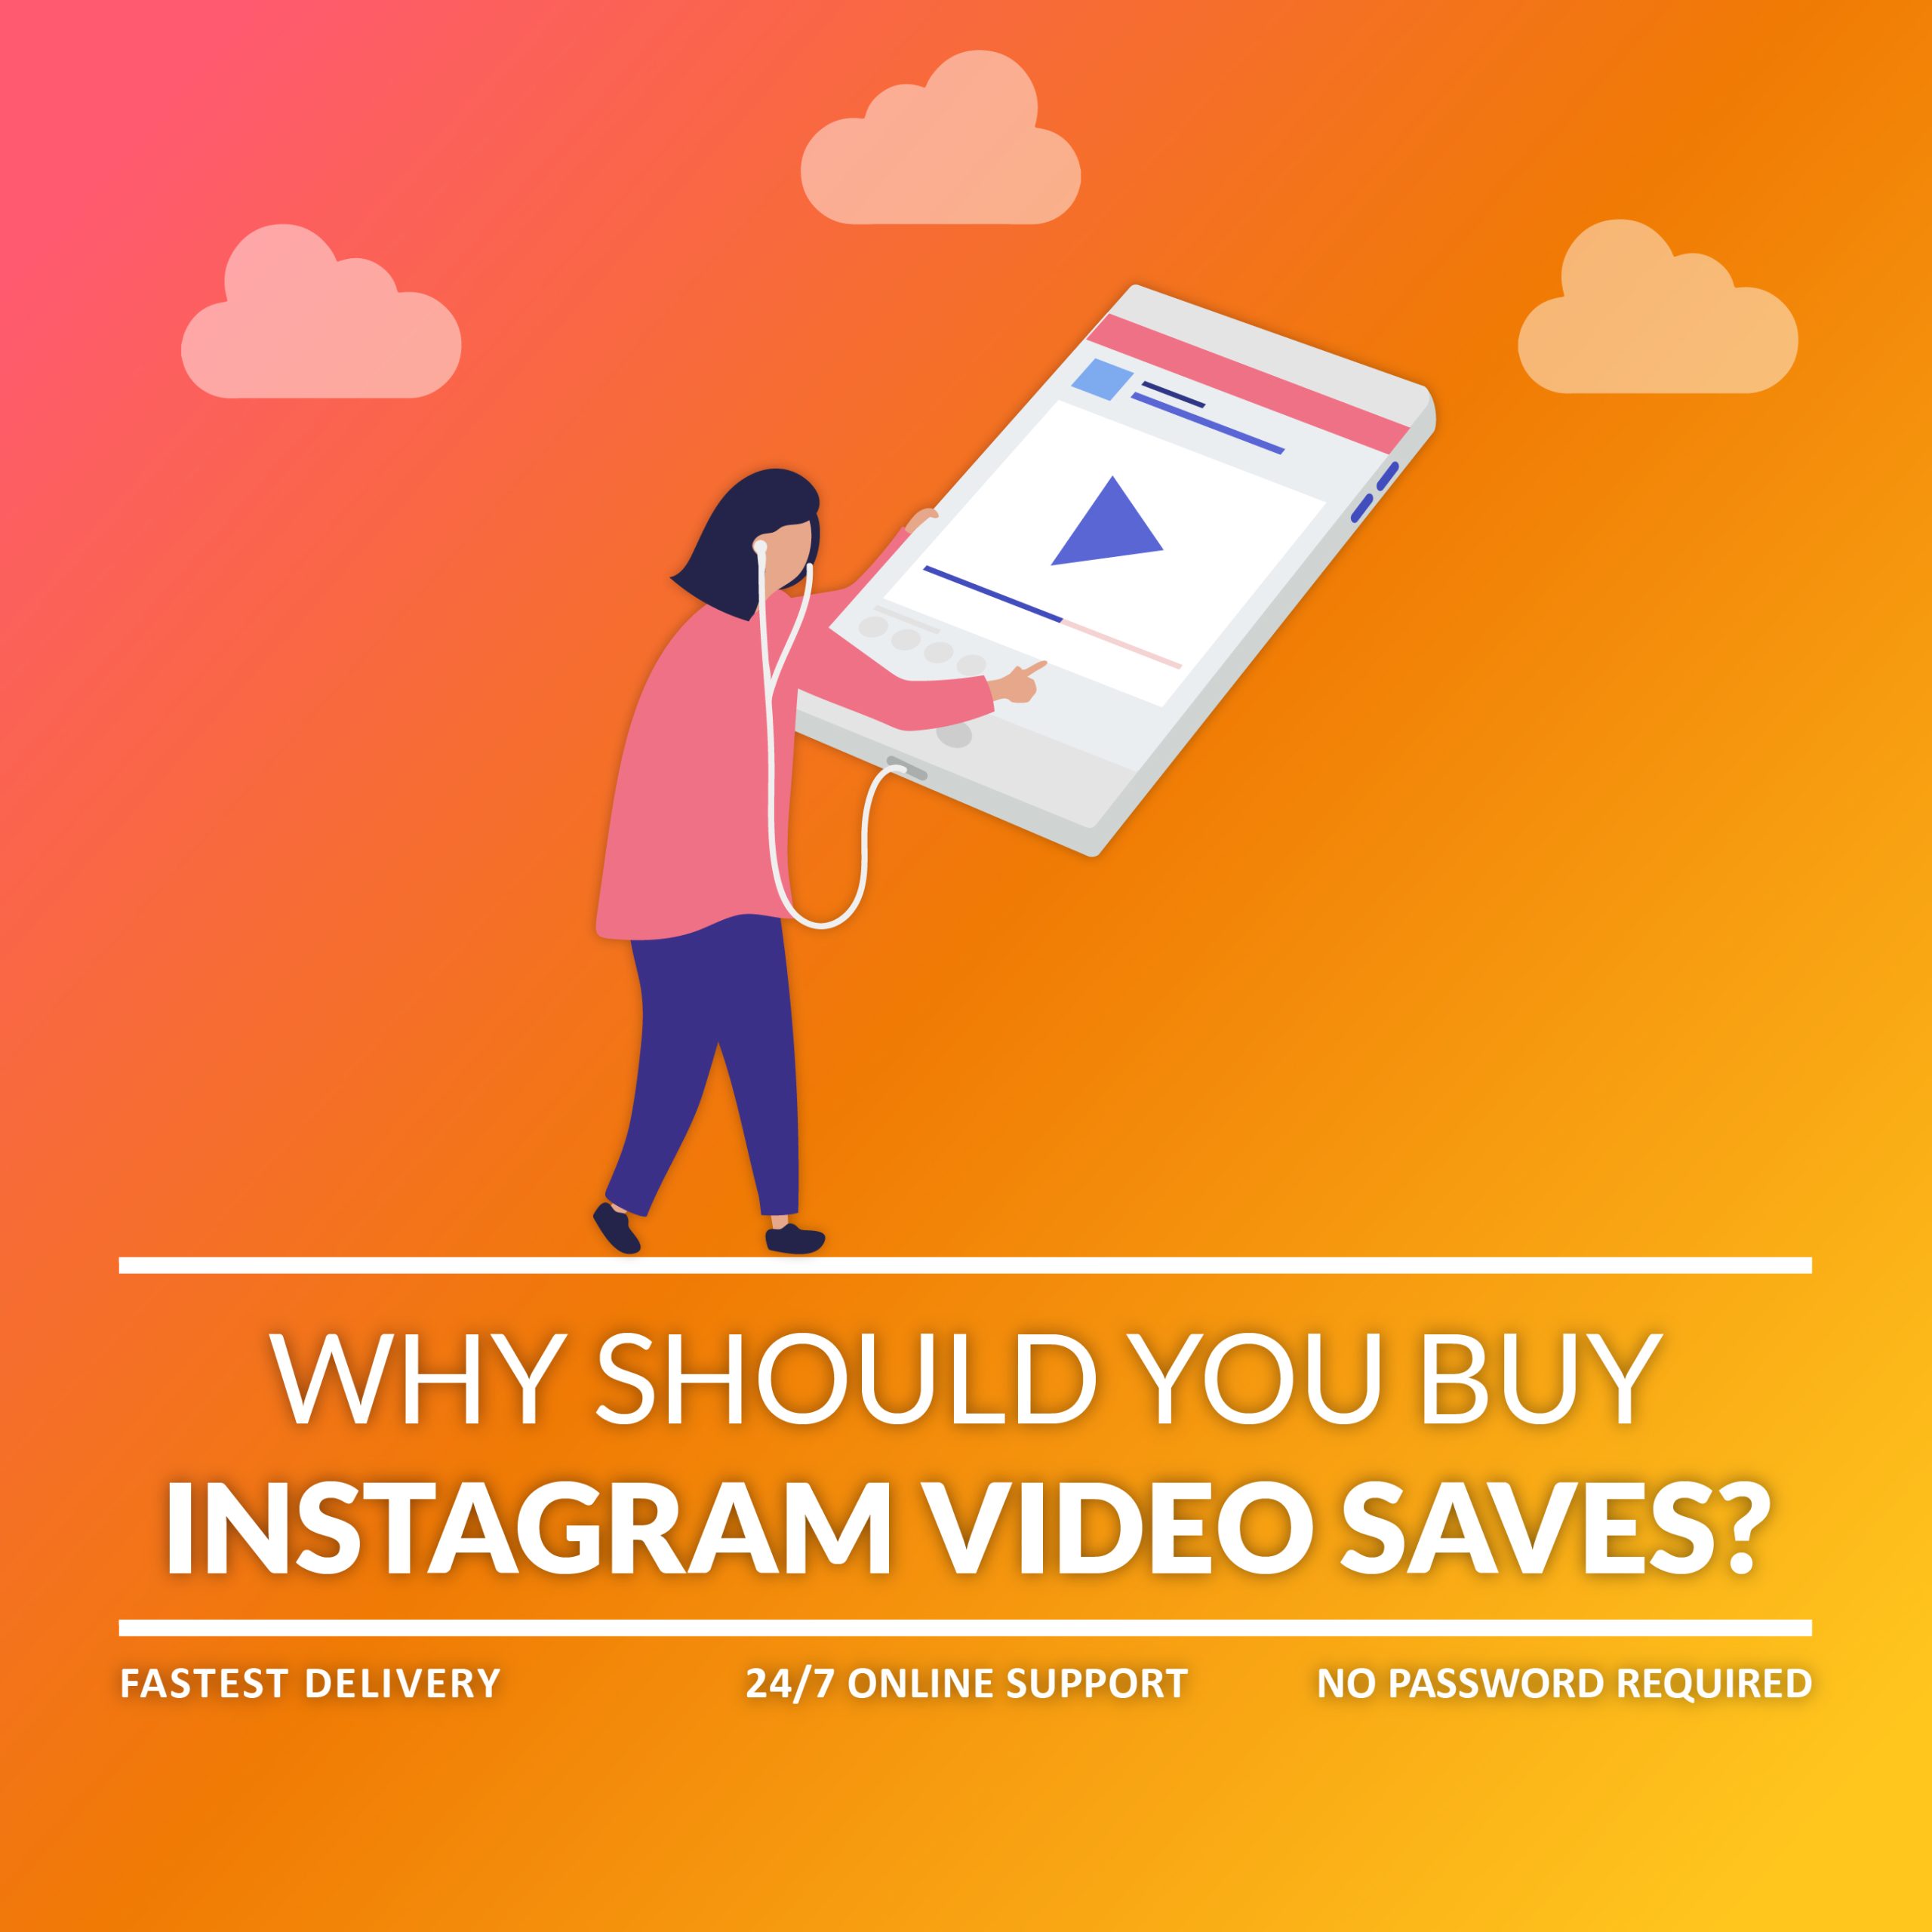 Why Should You Buy Instagram Video Saves?